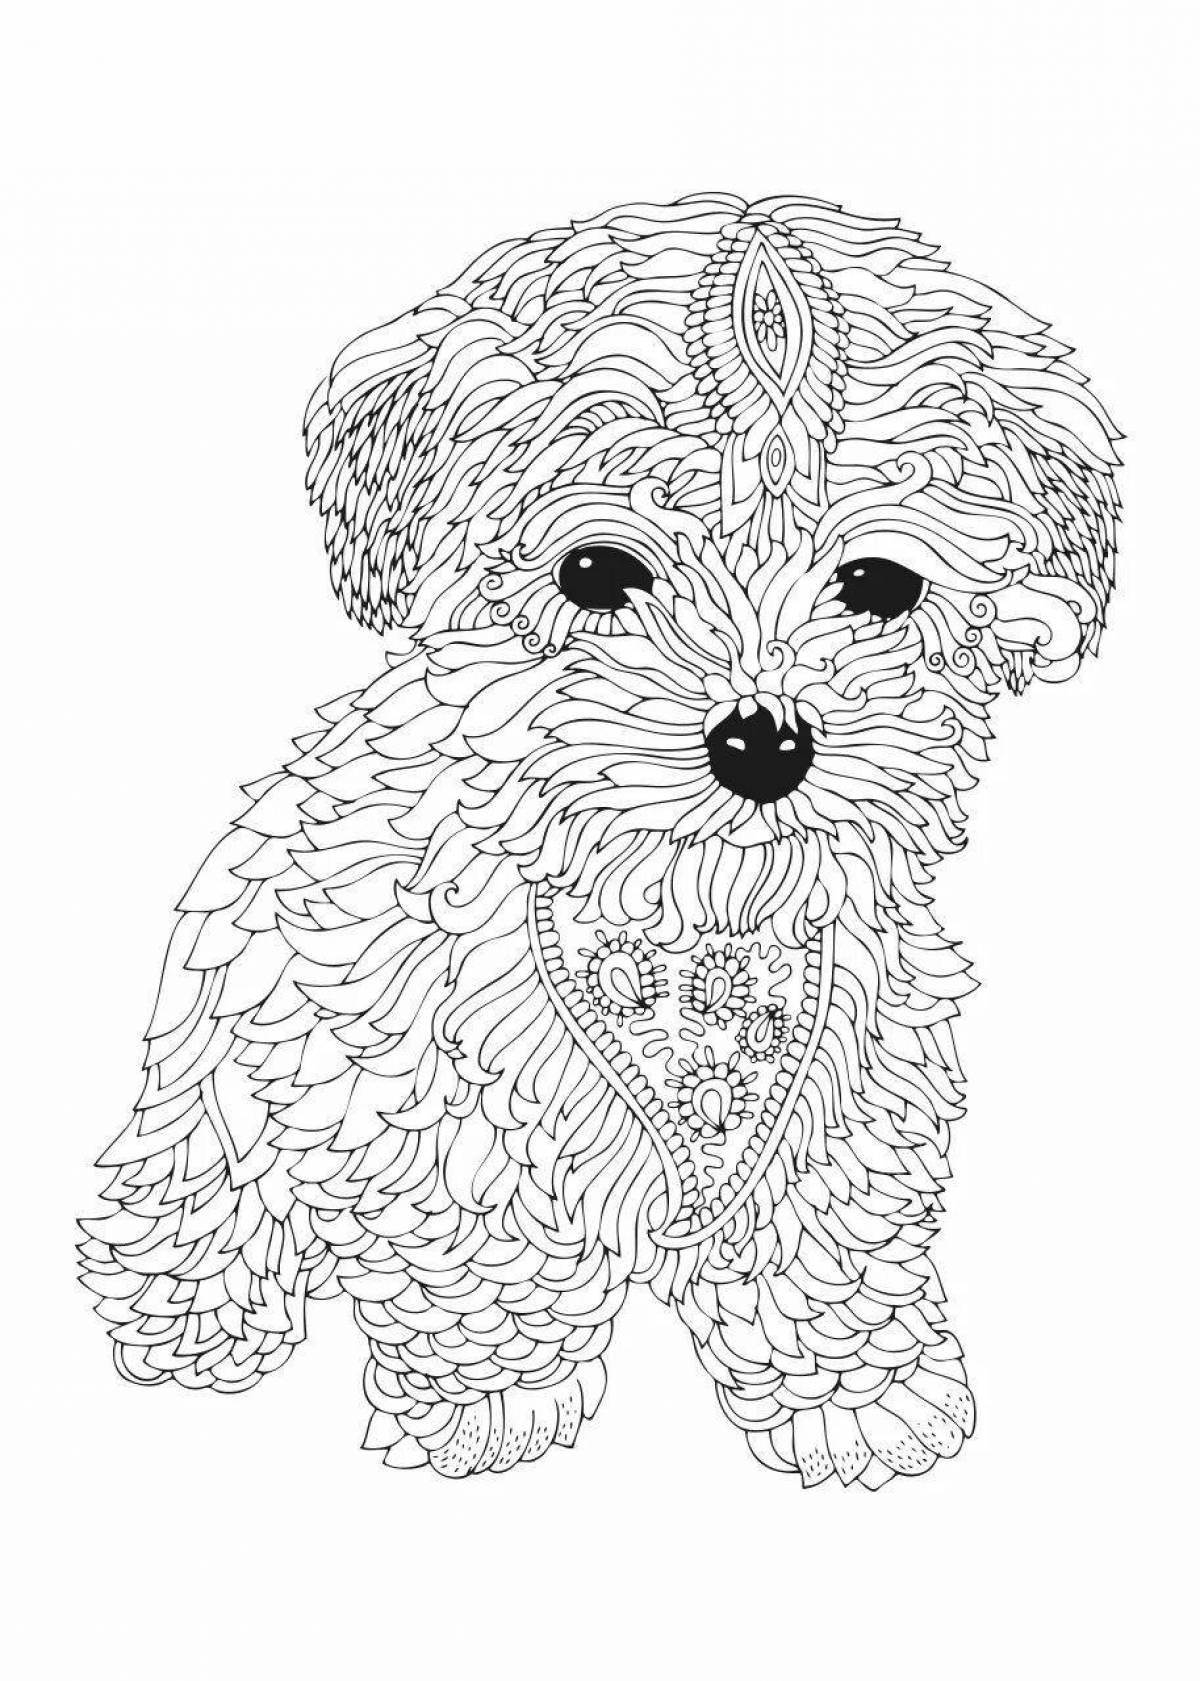 Amazing coloring pages for girls 9 years old - very beautiful animals